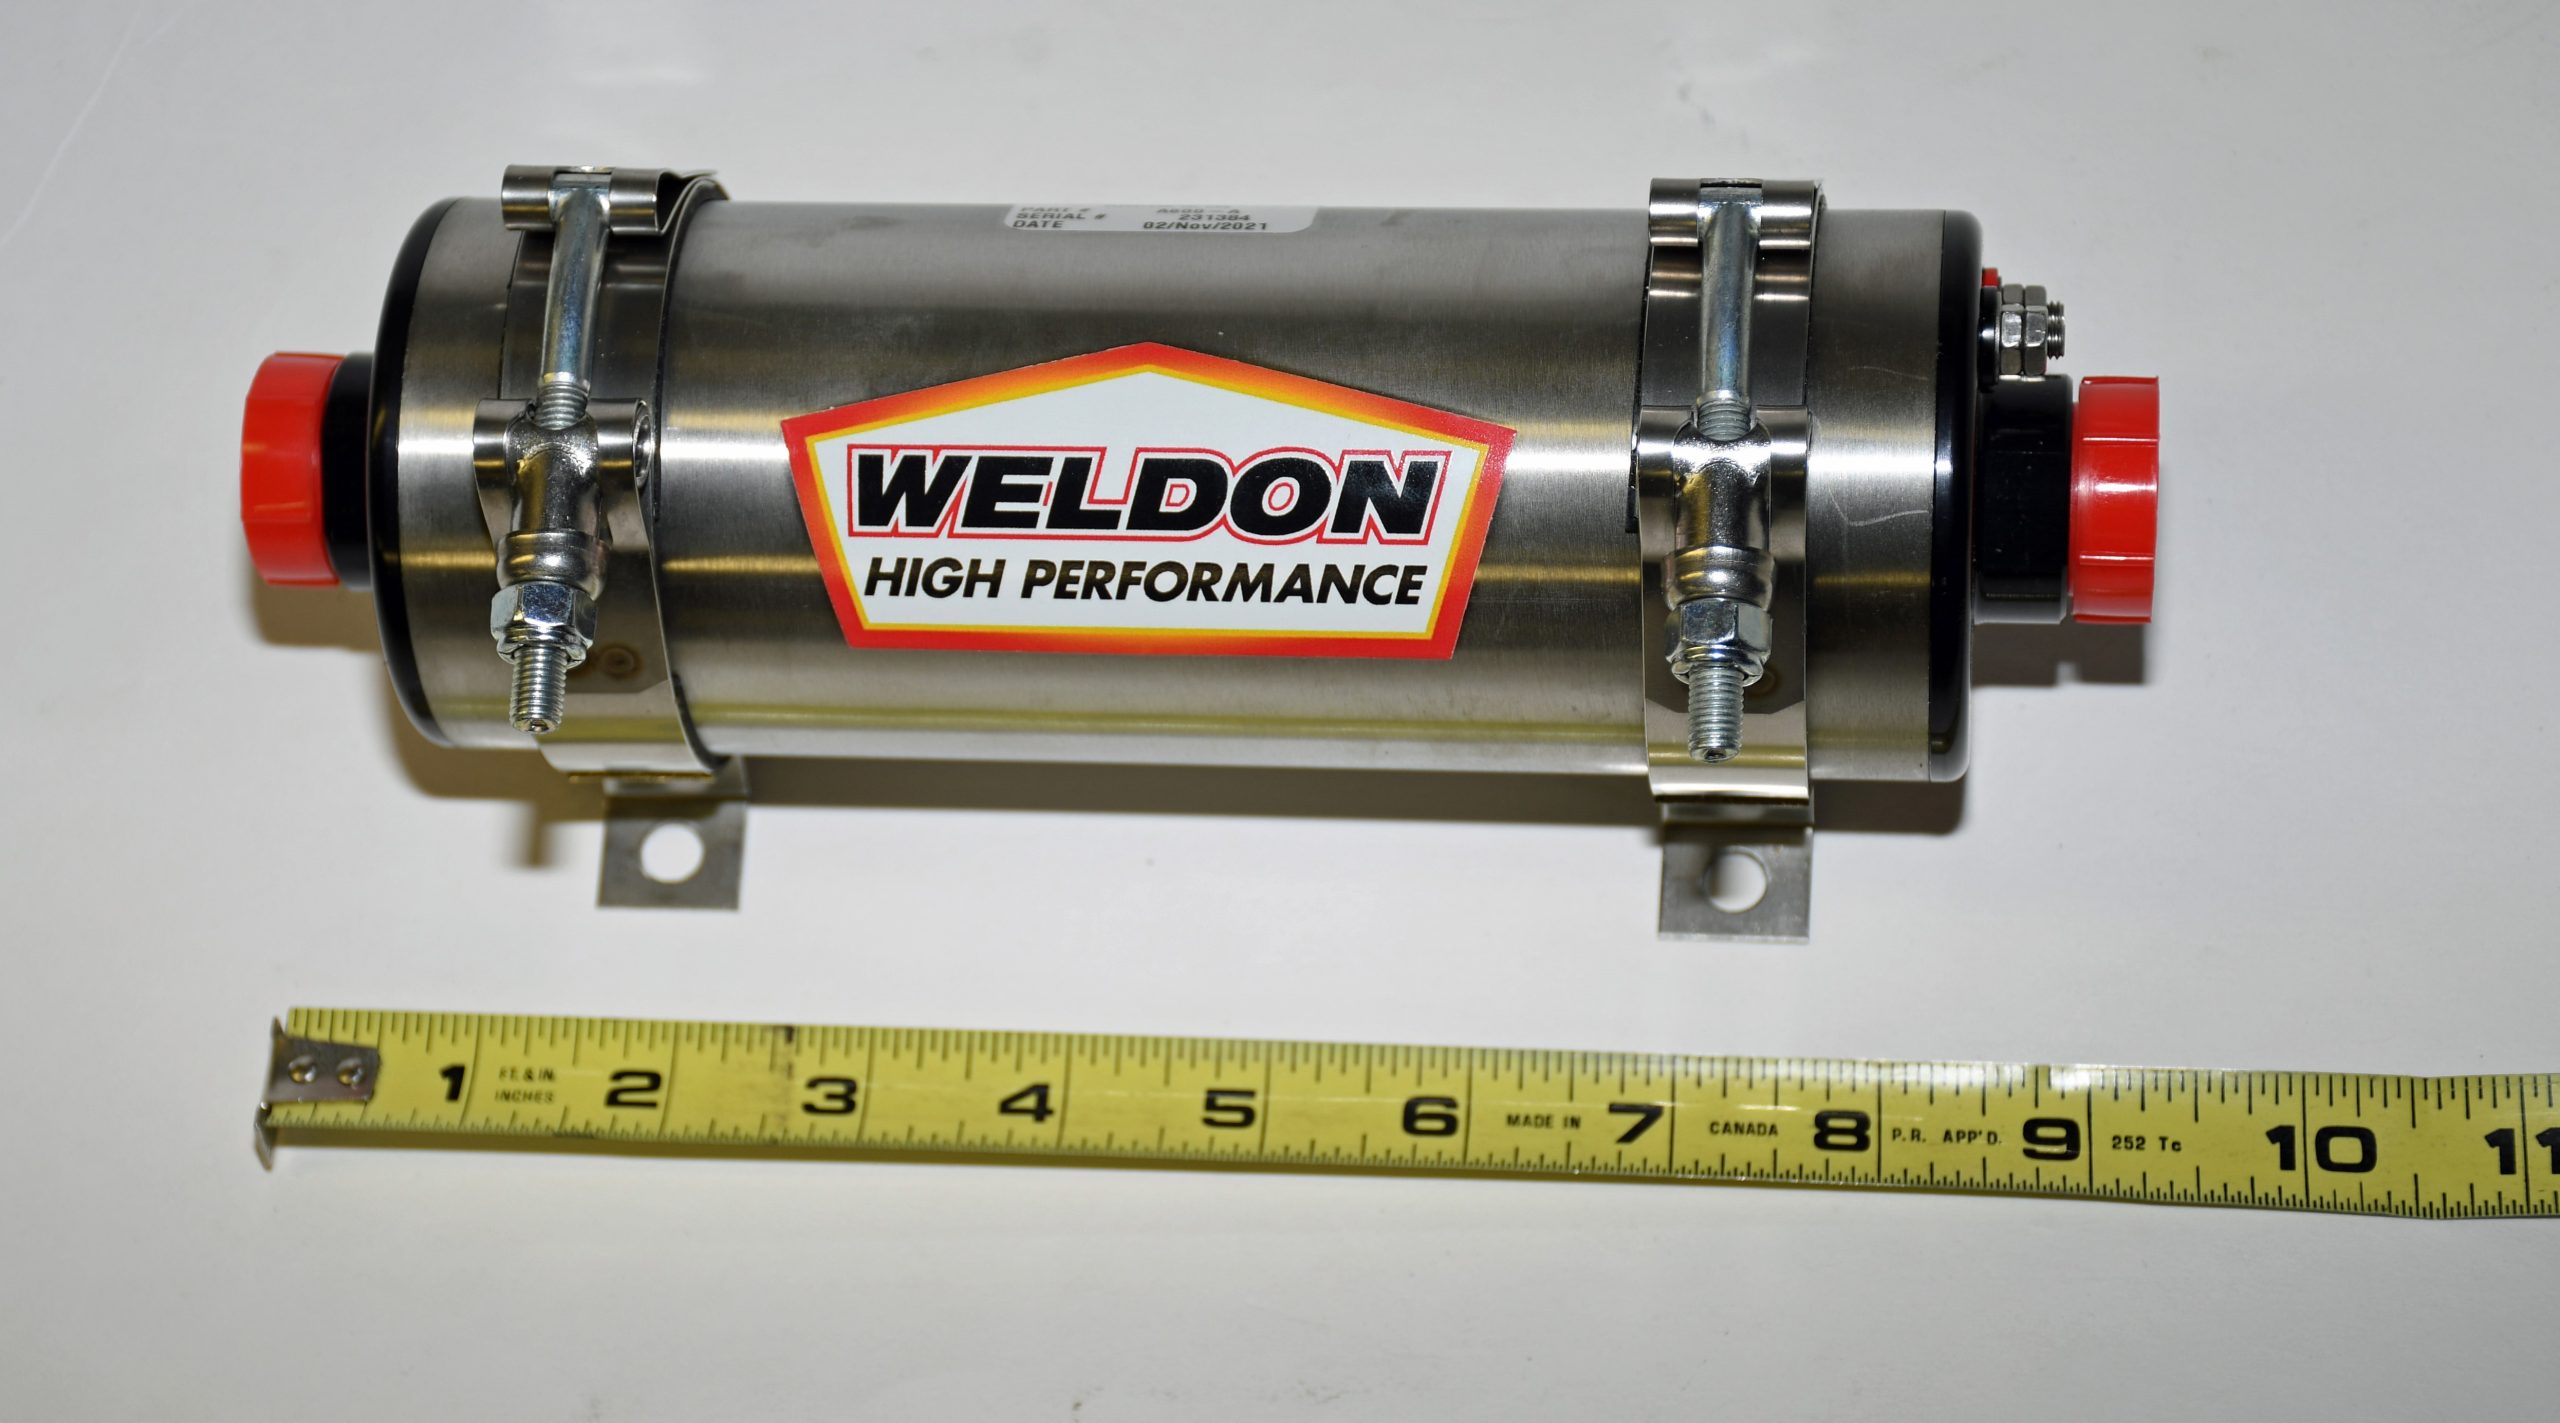 https://www.onallcylinders.com/wp-content/uploads/2022/04/22/measuring-weldon-electric-fuel-pump-with-tape-measure-scaled.jpg